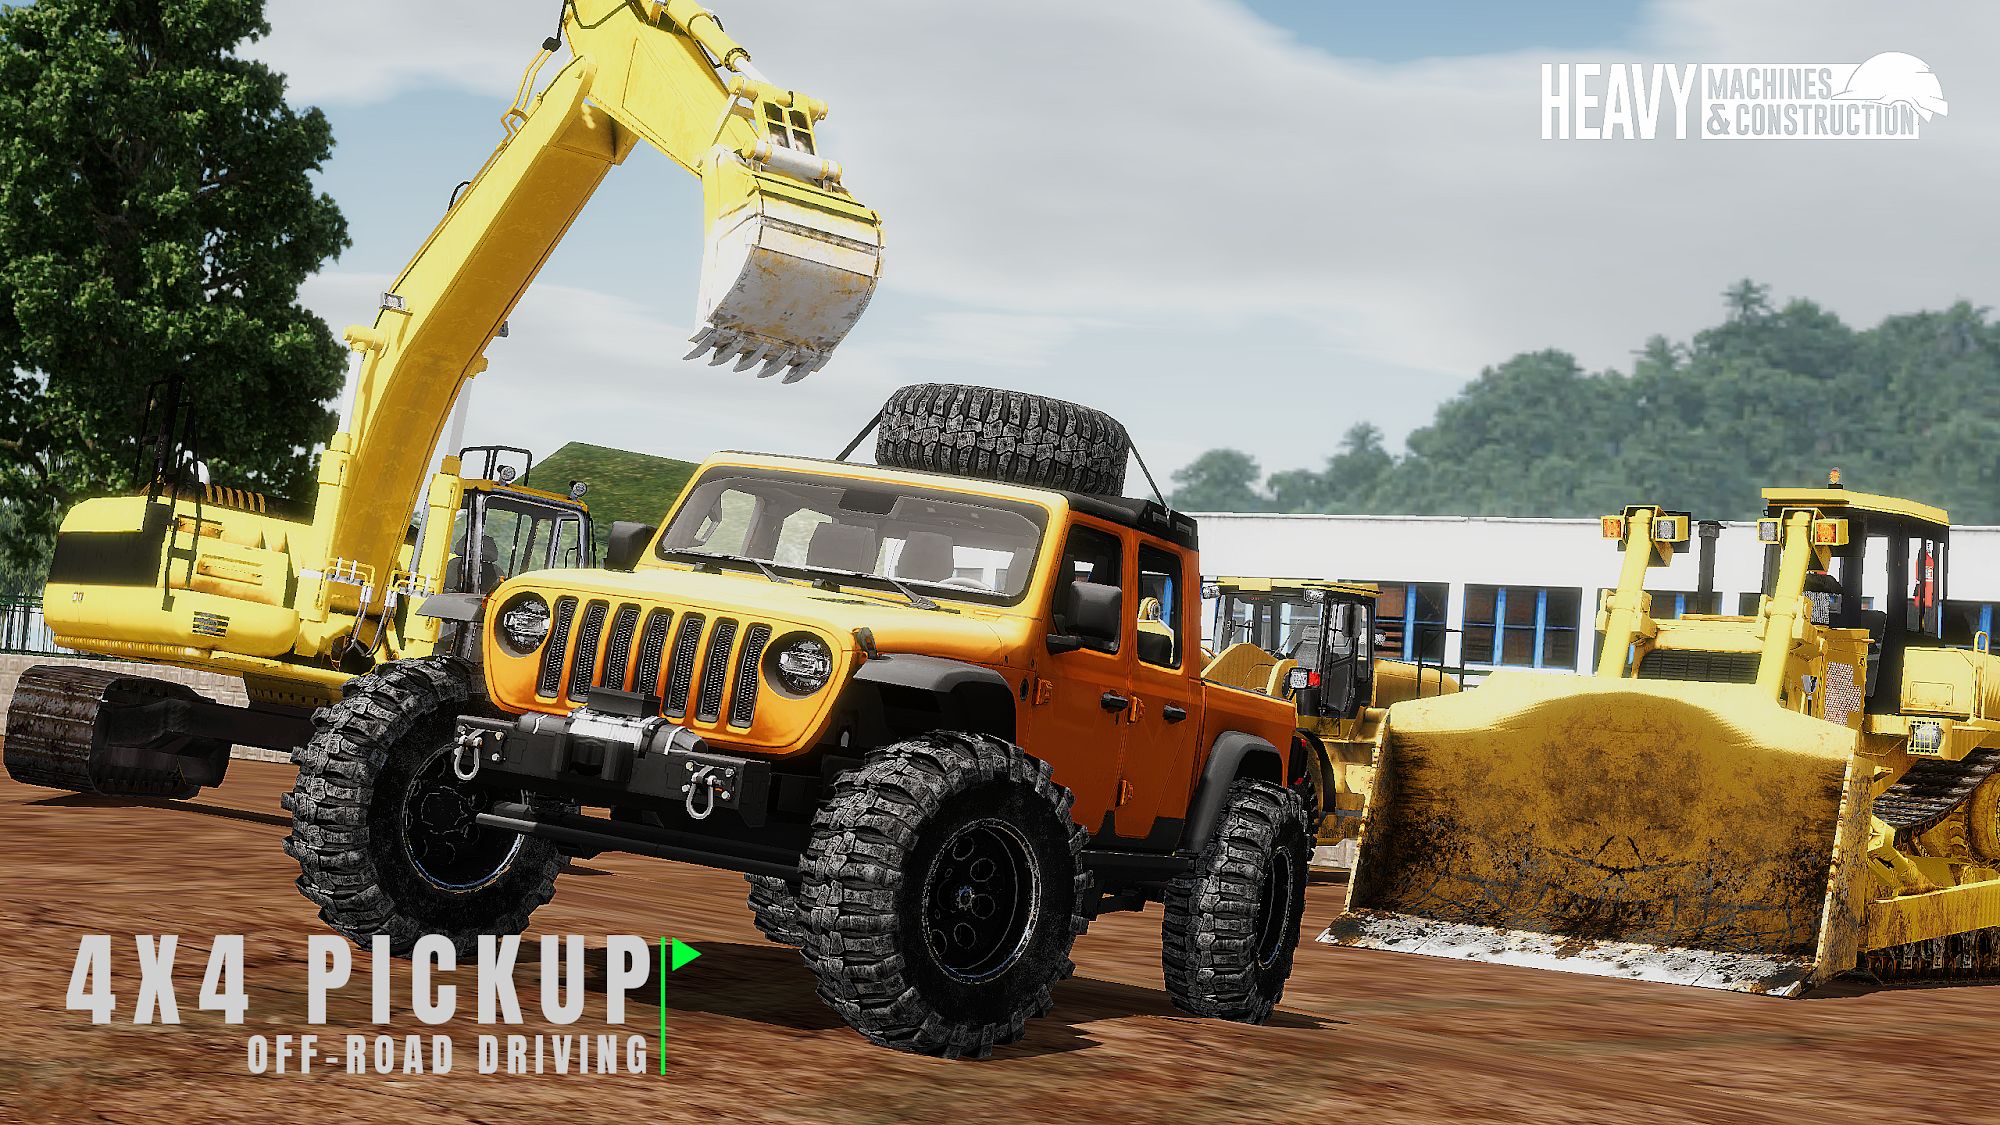 Download Heavy Machines & Construction Android free game.